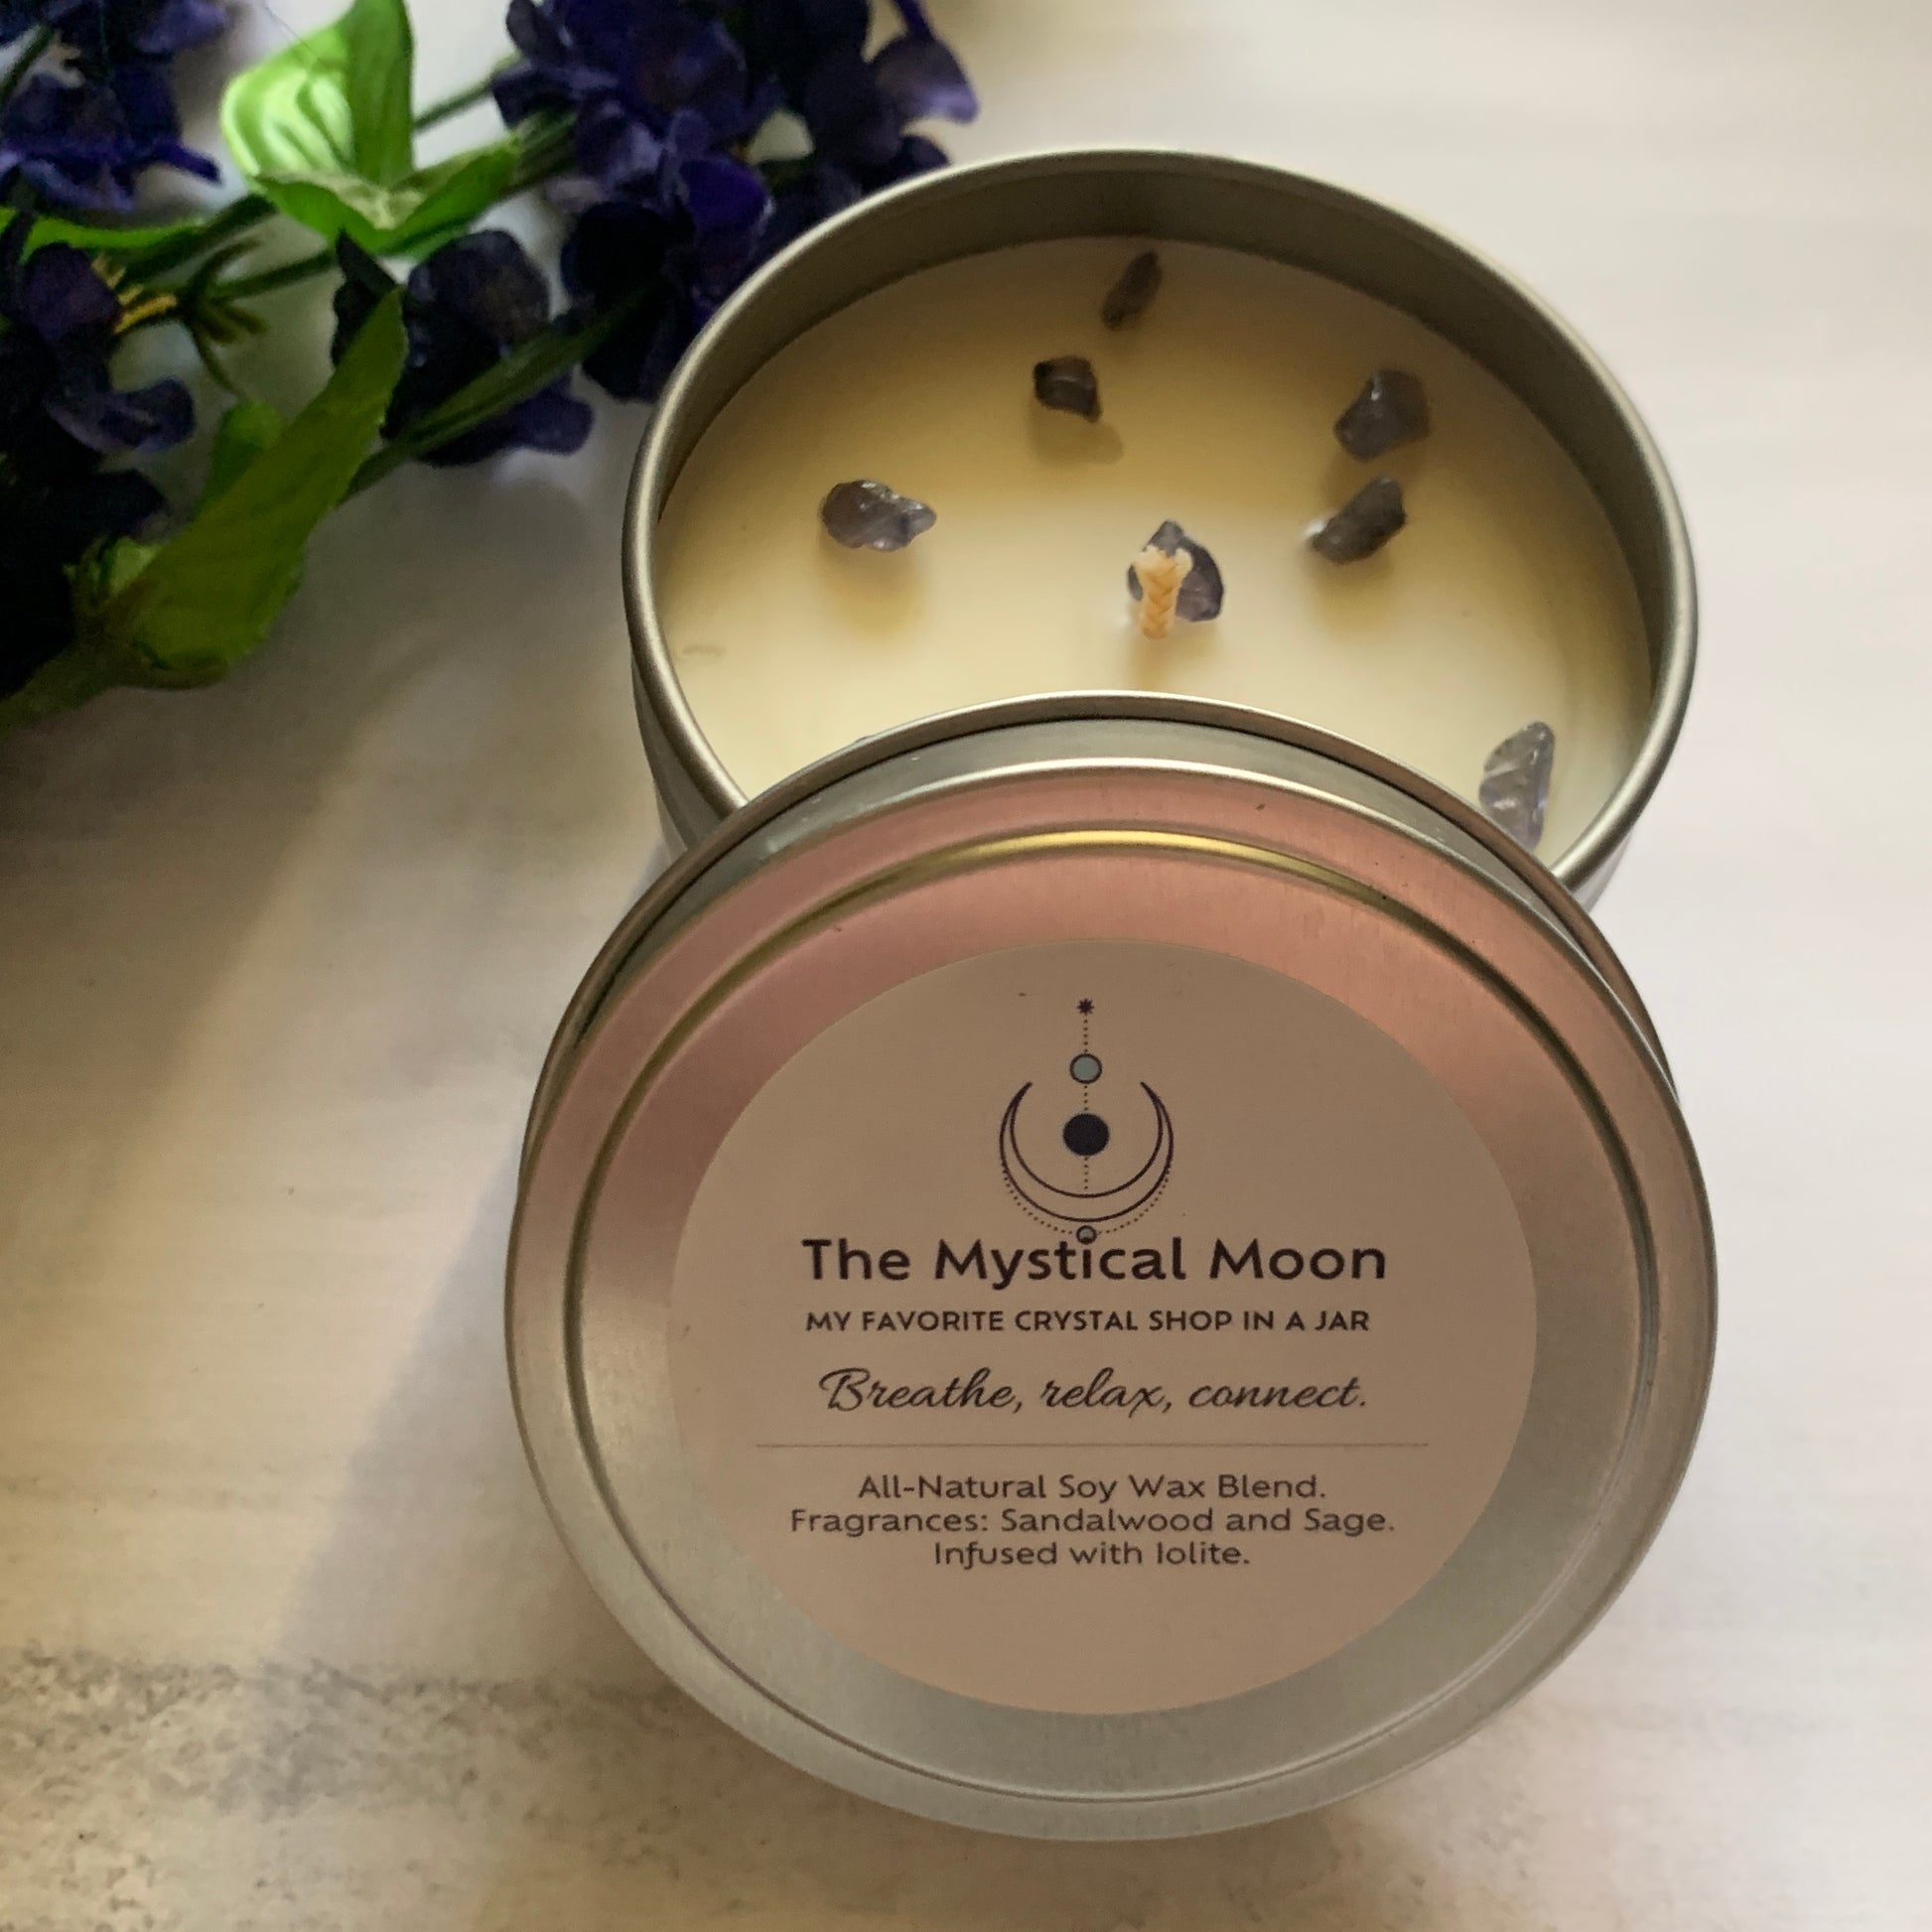 The Mystical Moon - My Favorite Crystal Shop Travel Tin Candle